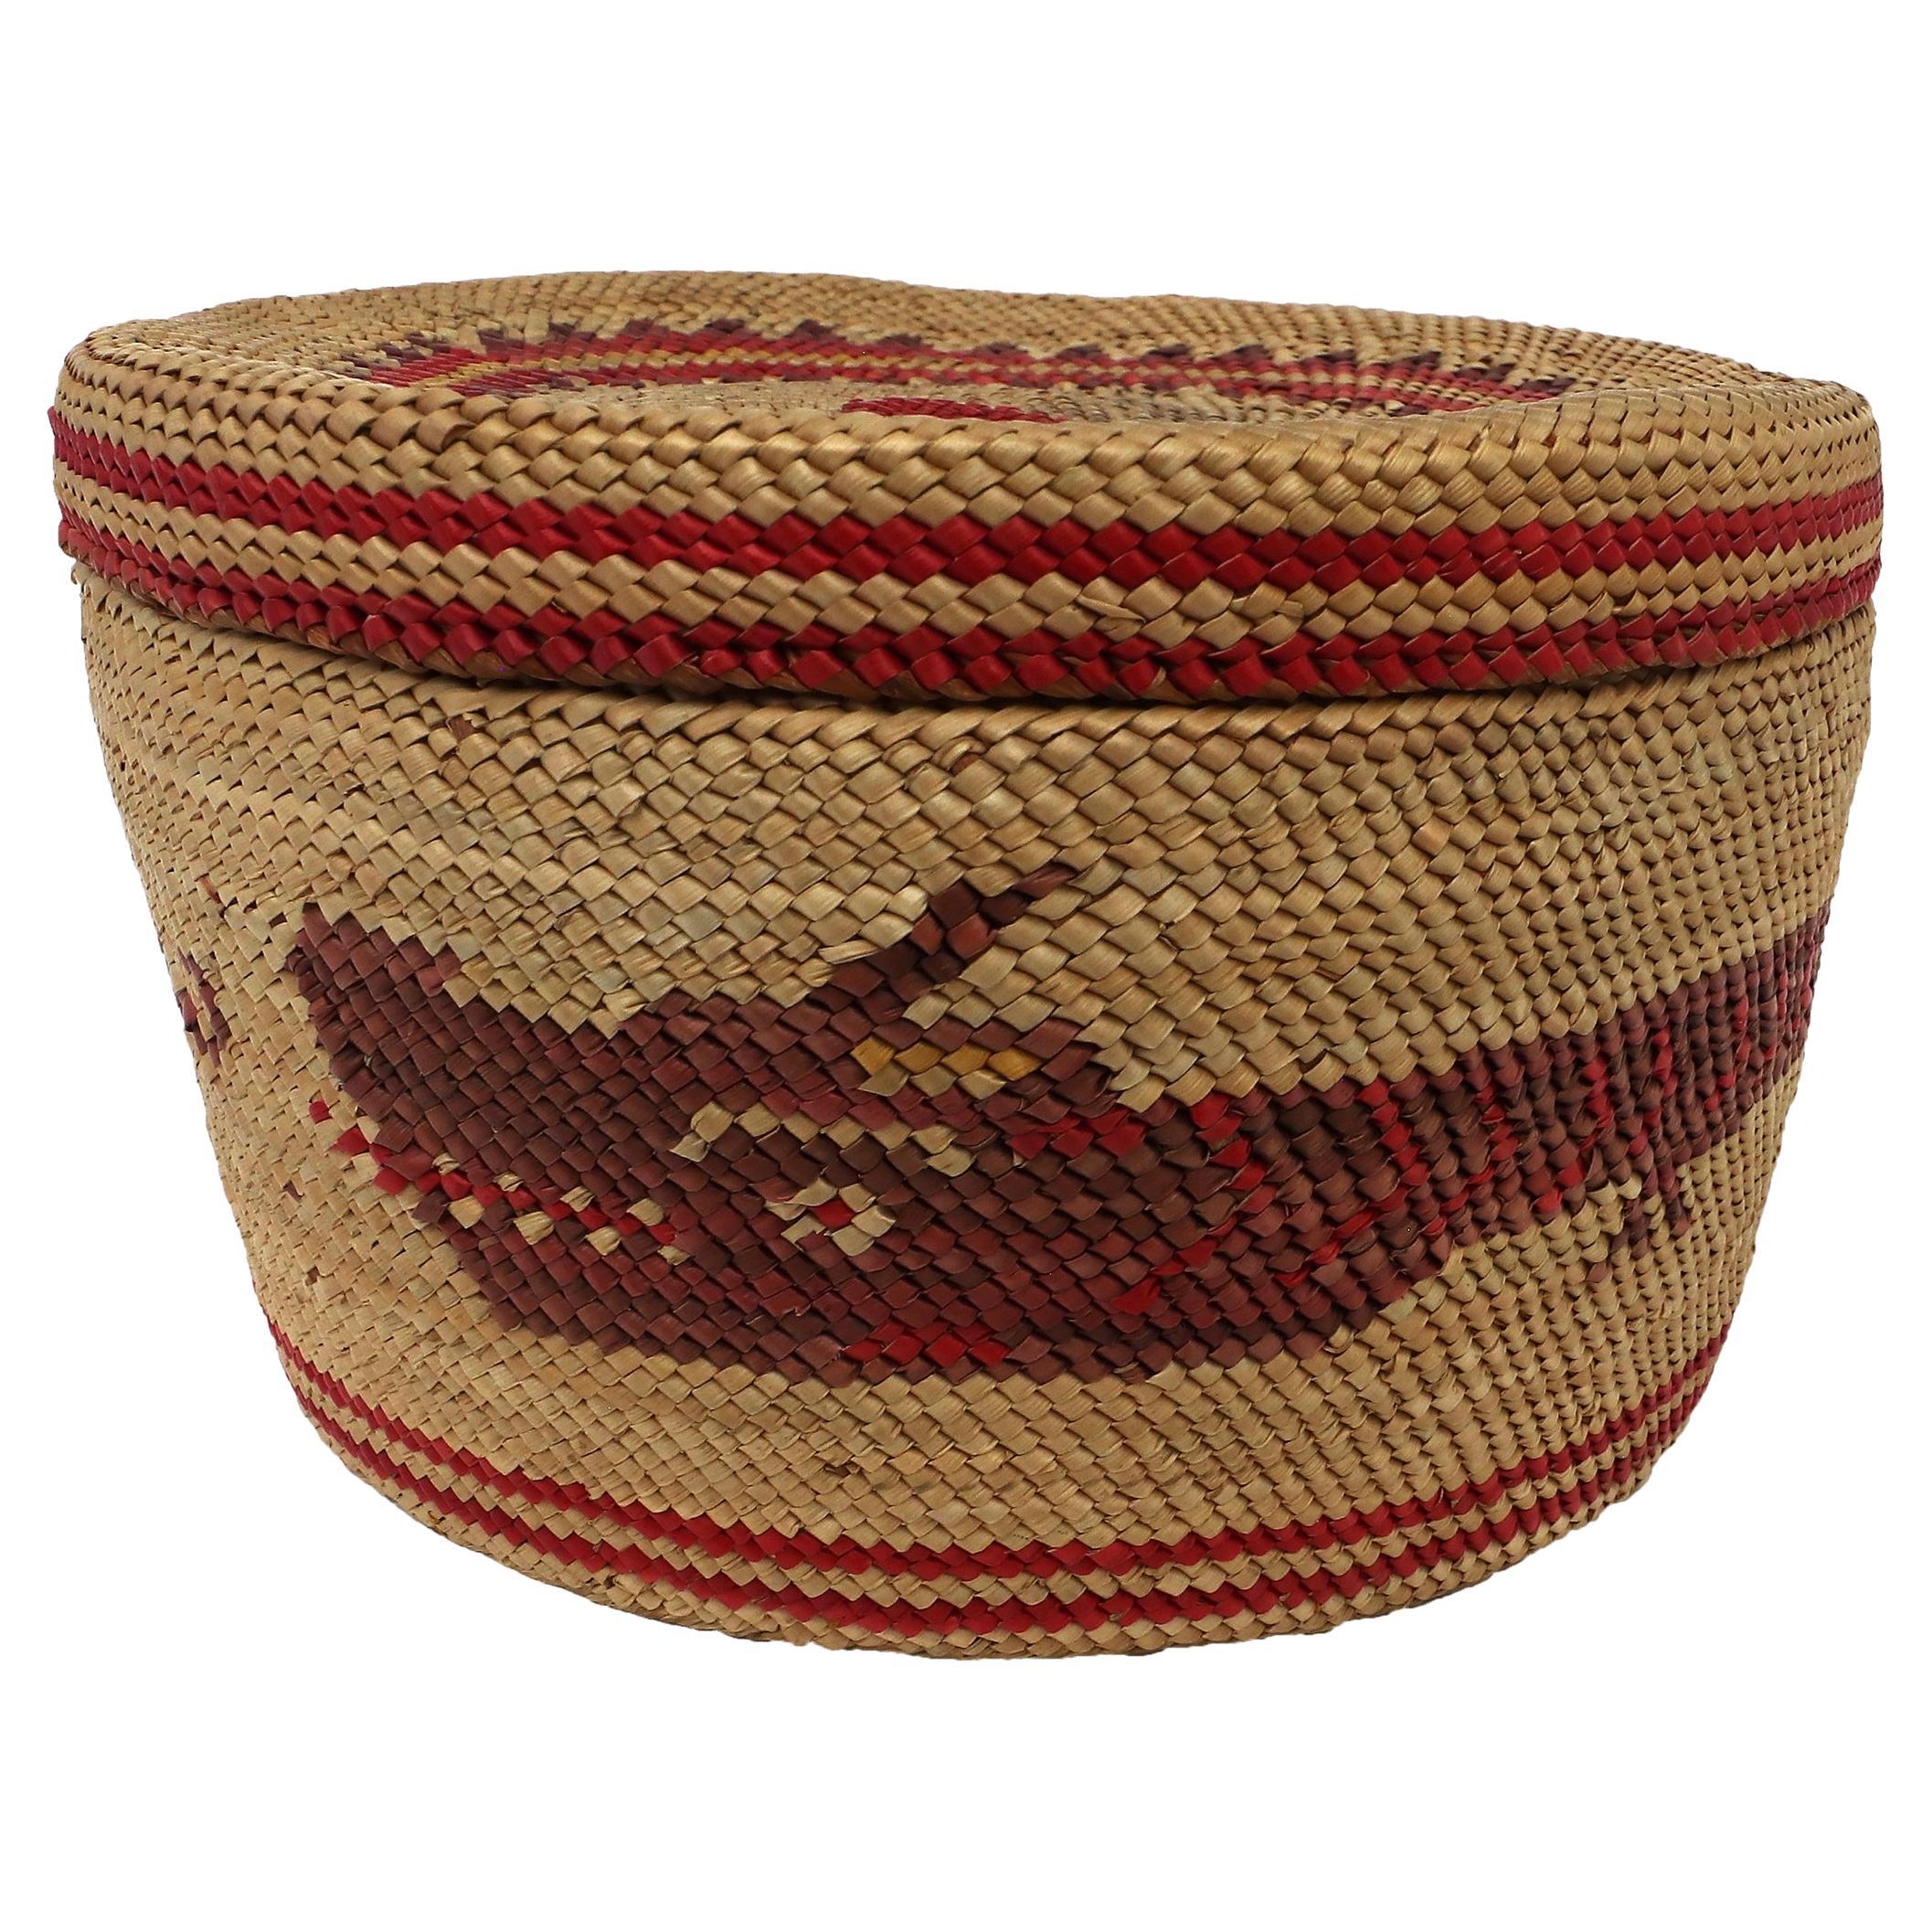 Nootka Northwest Coast 1900 Woven Basket with Top, Red and Black Designs For Sale